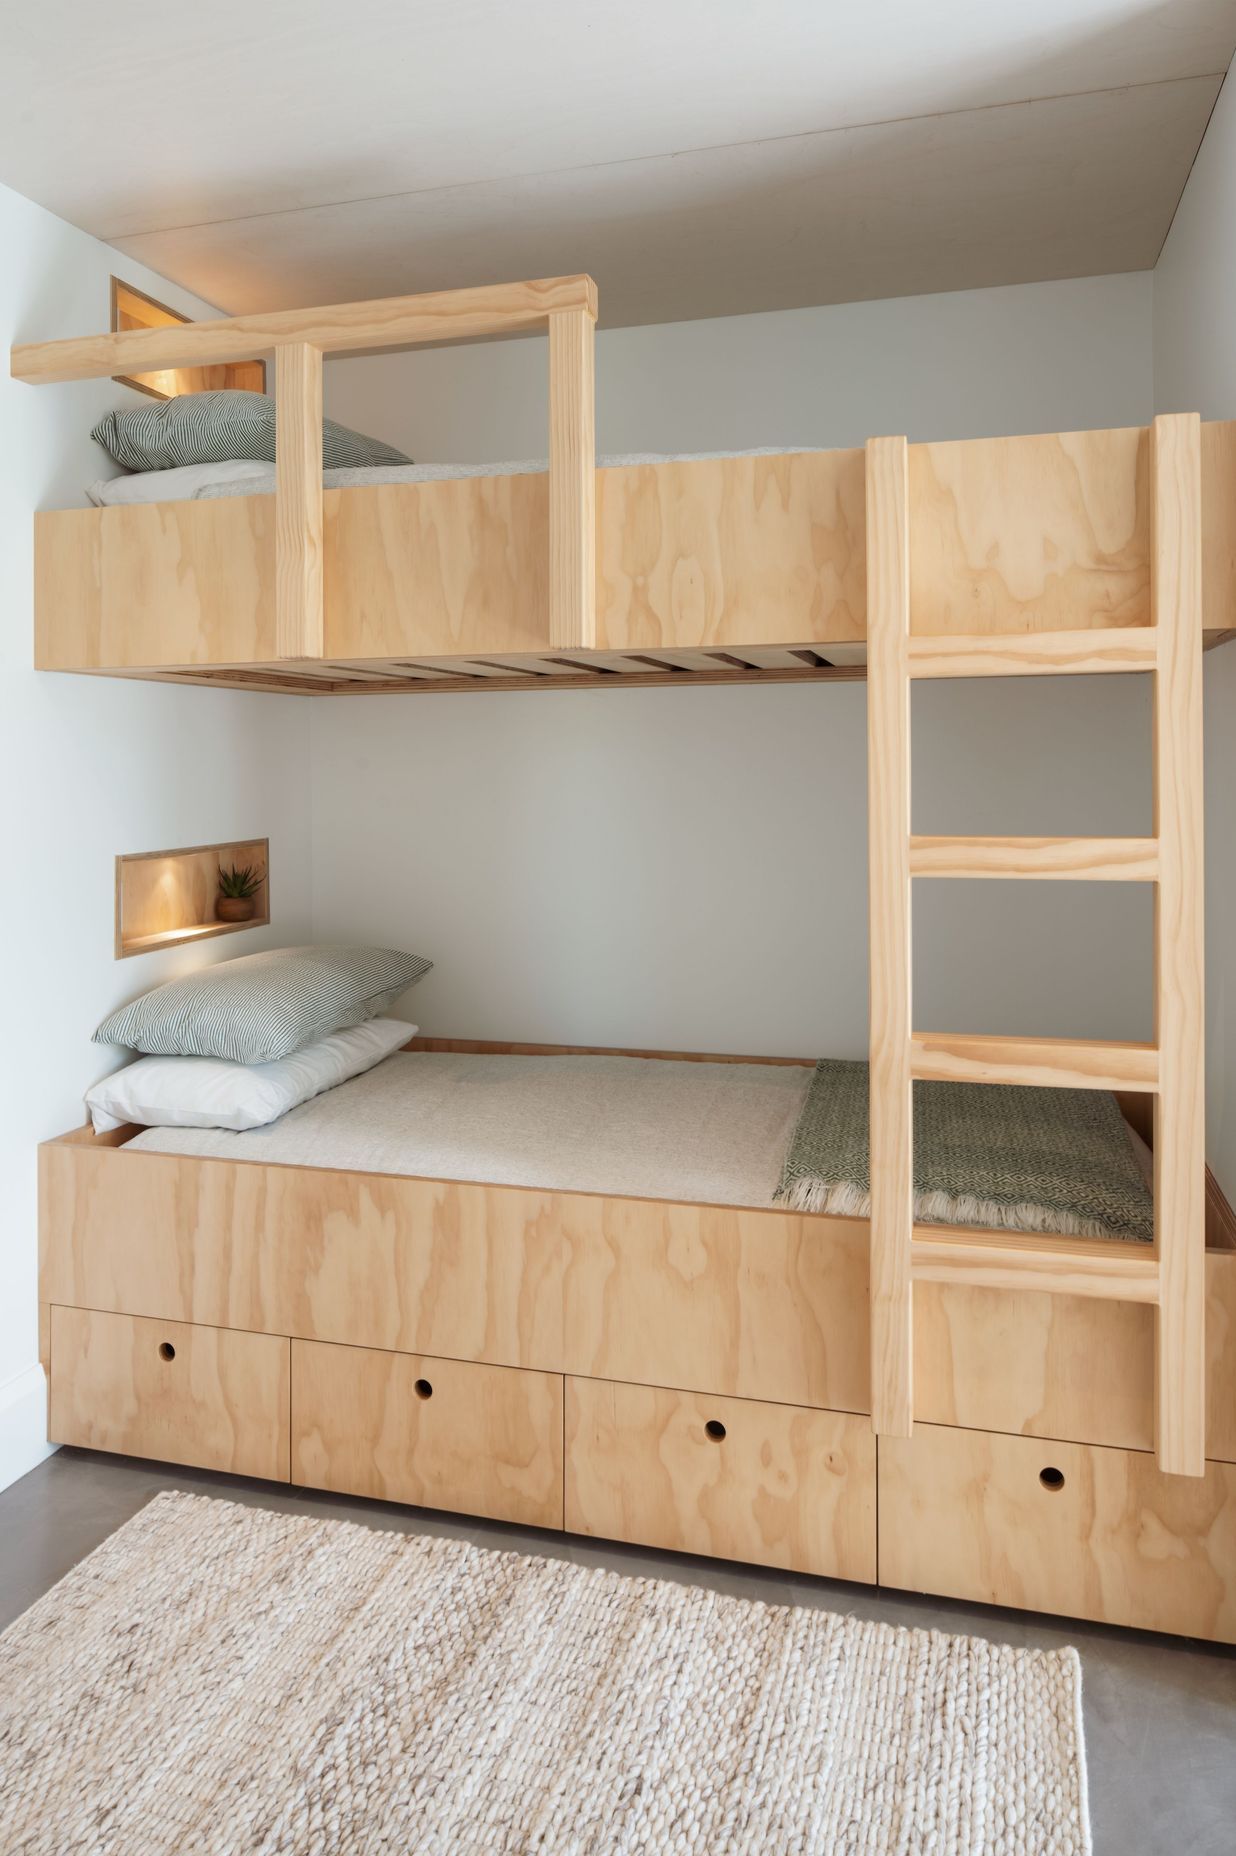 Originally designed as a two-bedroom bach, an additional bunk room was added to the design scheme so that the owners' grandchildren could spend time there as well.